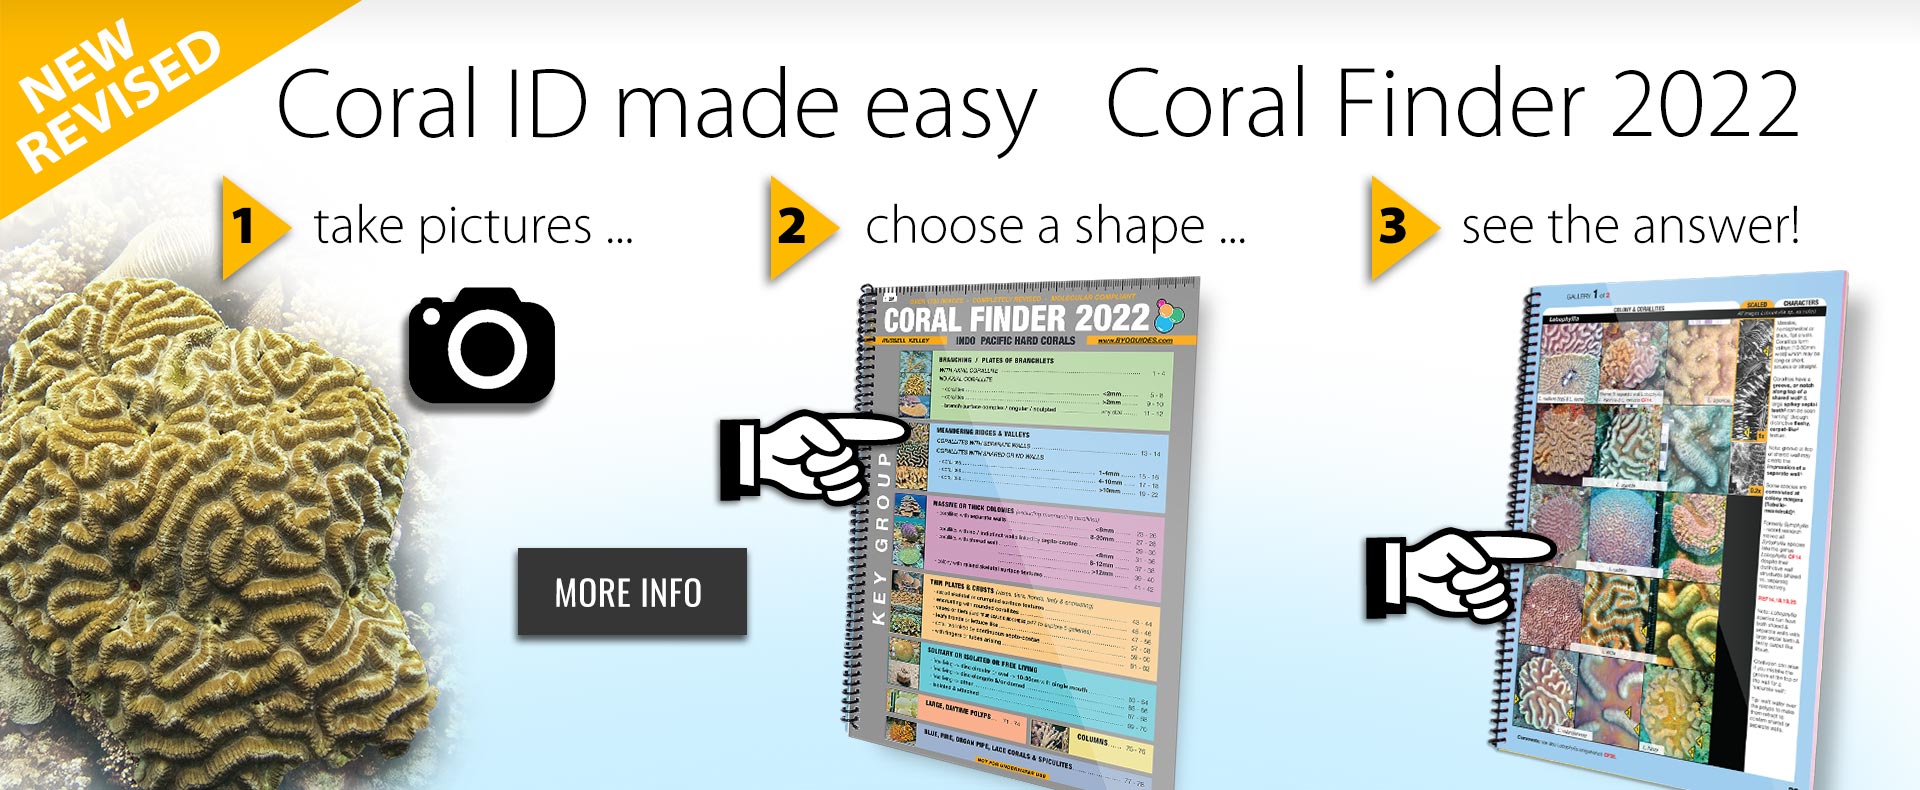 Coral Finder 2022 - coral ID made easy 1: take pictures 2: choose a shape 3: see the answer!